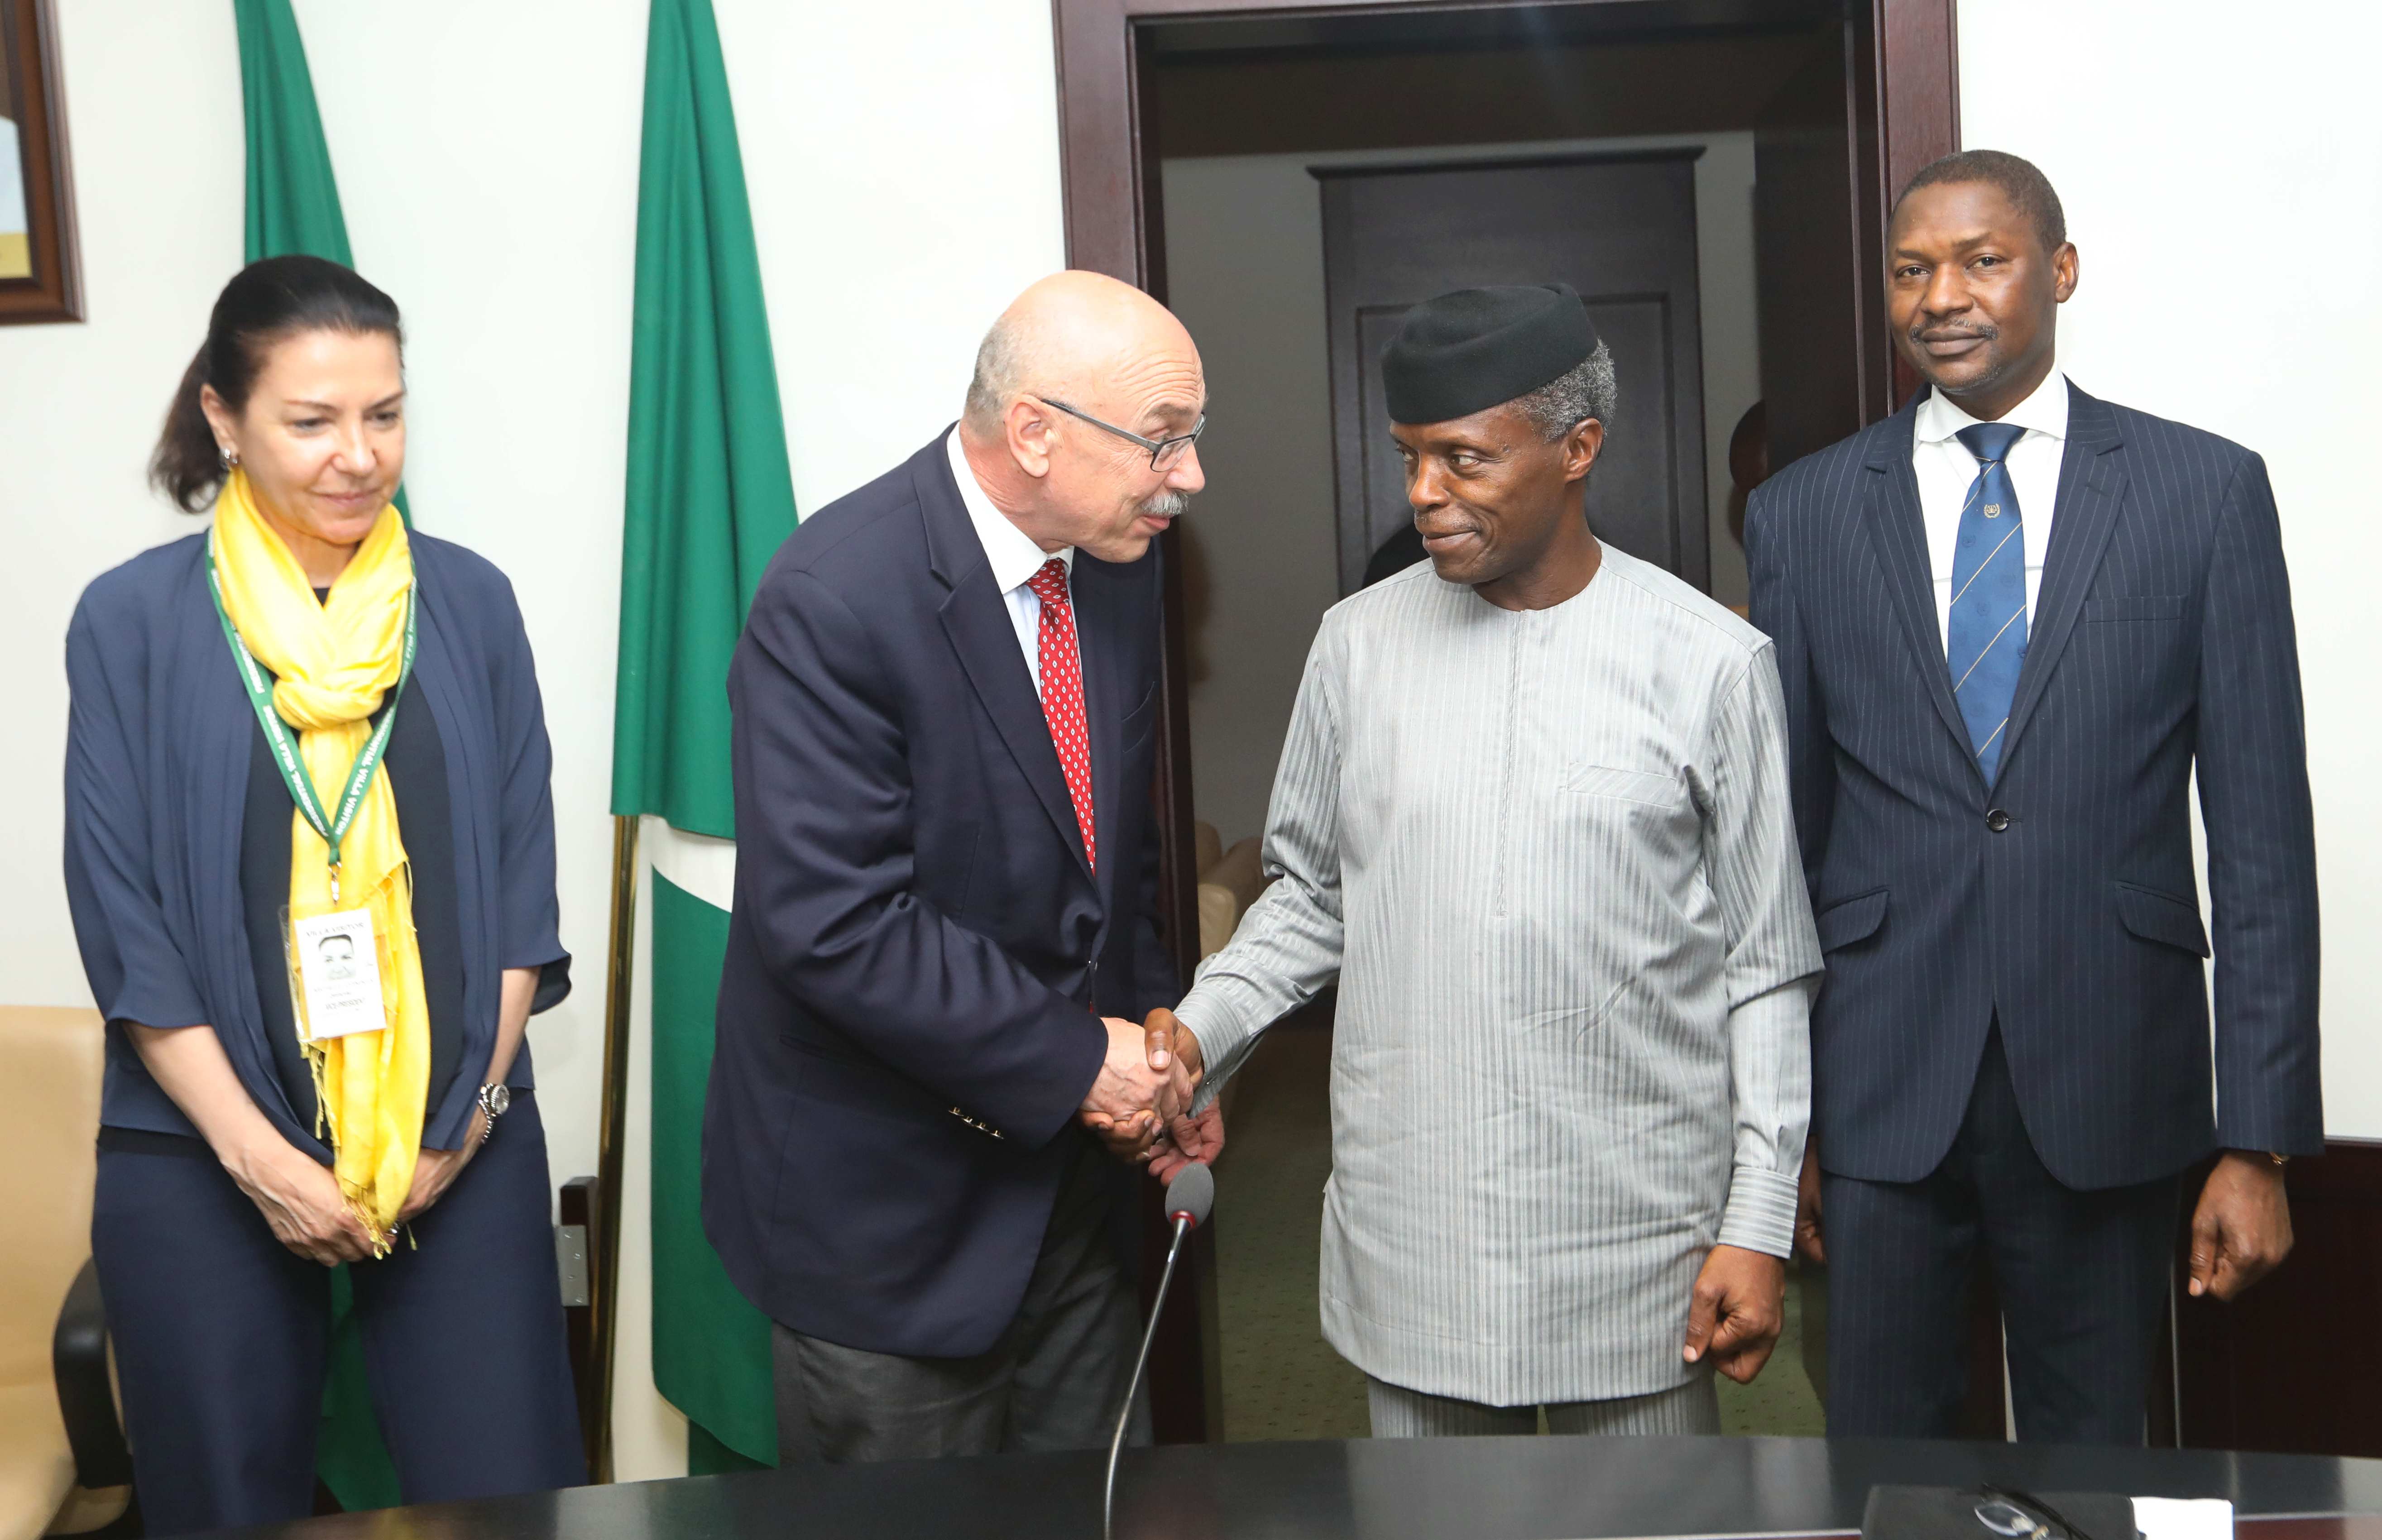 VP Osinbajo Receives In Audience a High-Level UN Delegation On Counter-Terrorism On 25/07/2018